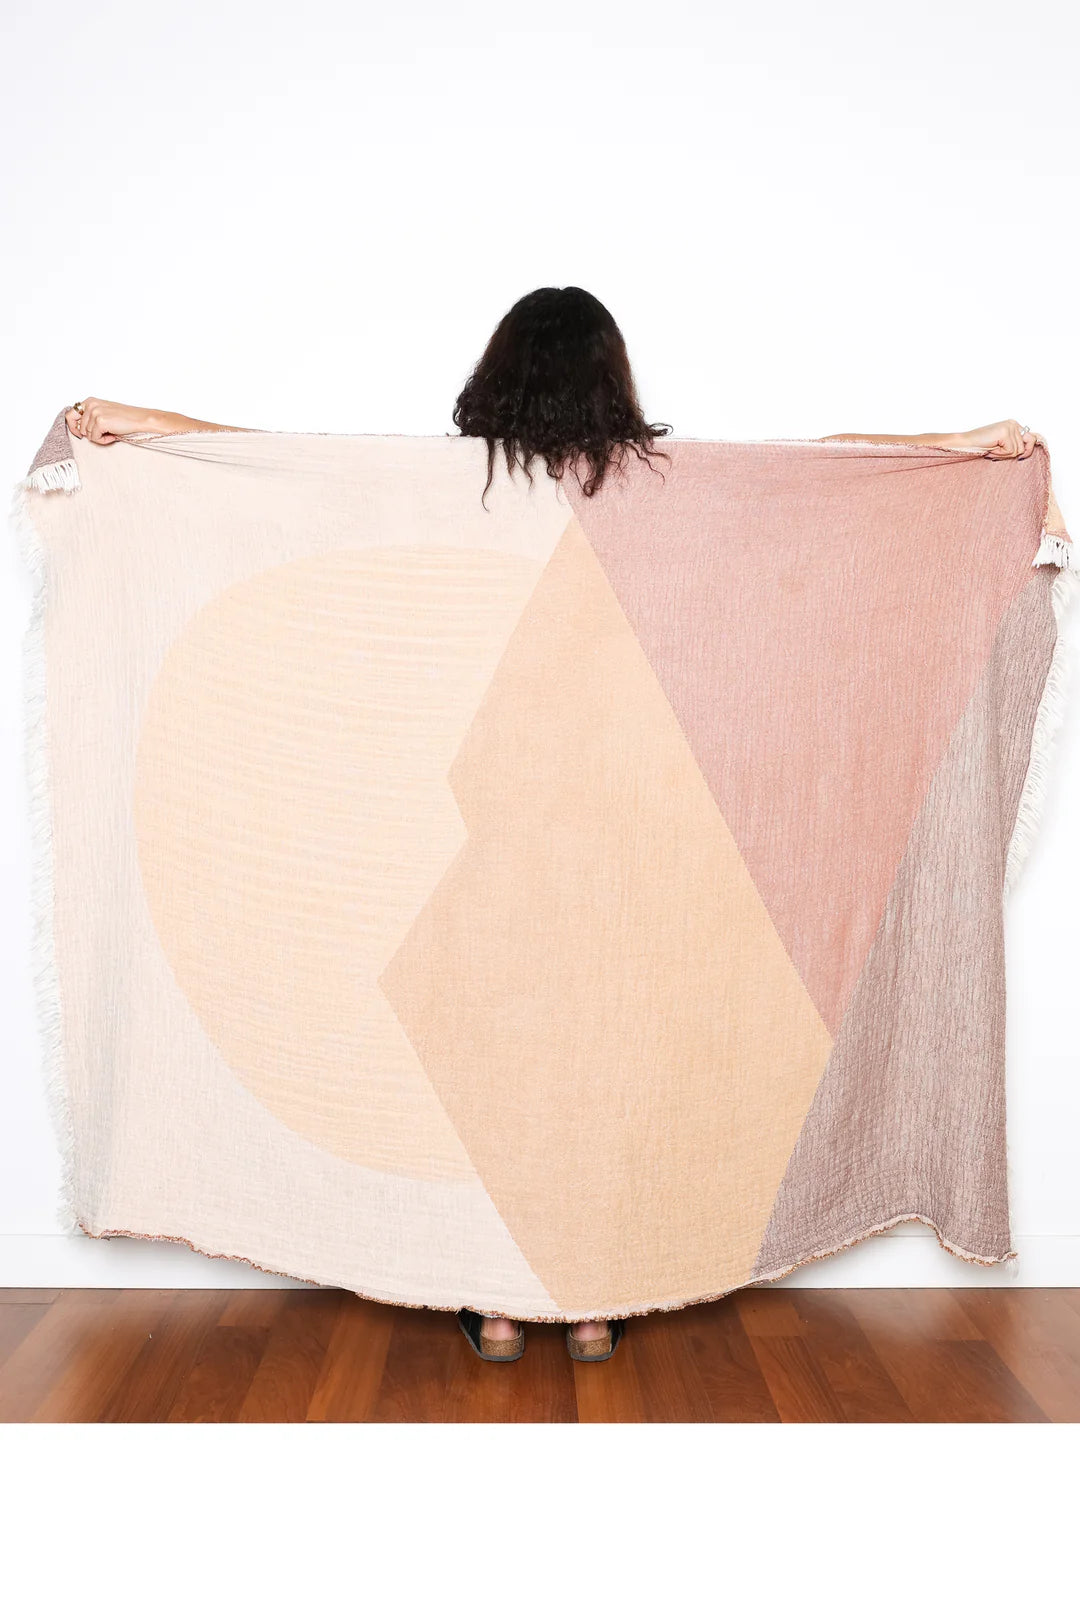 Meander Throw